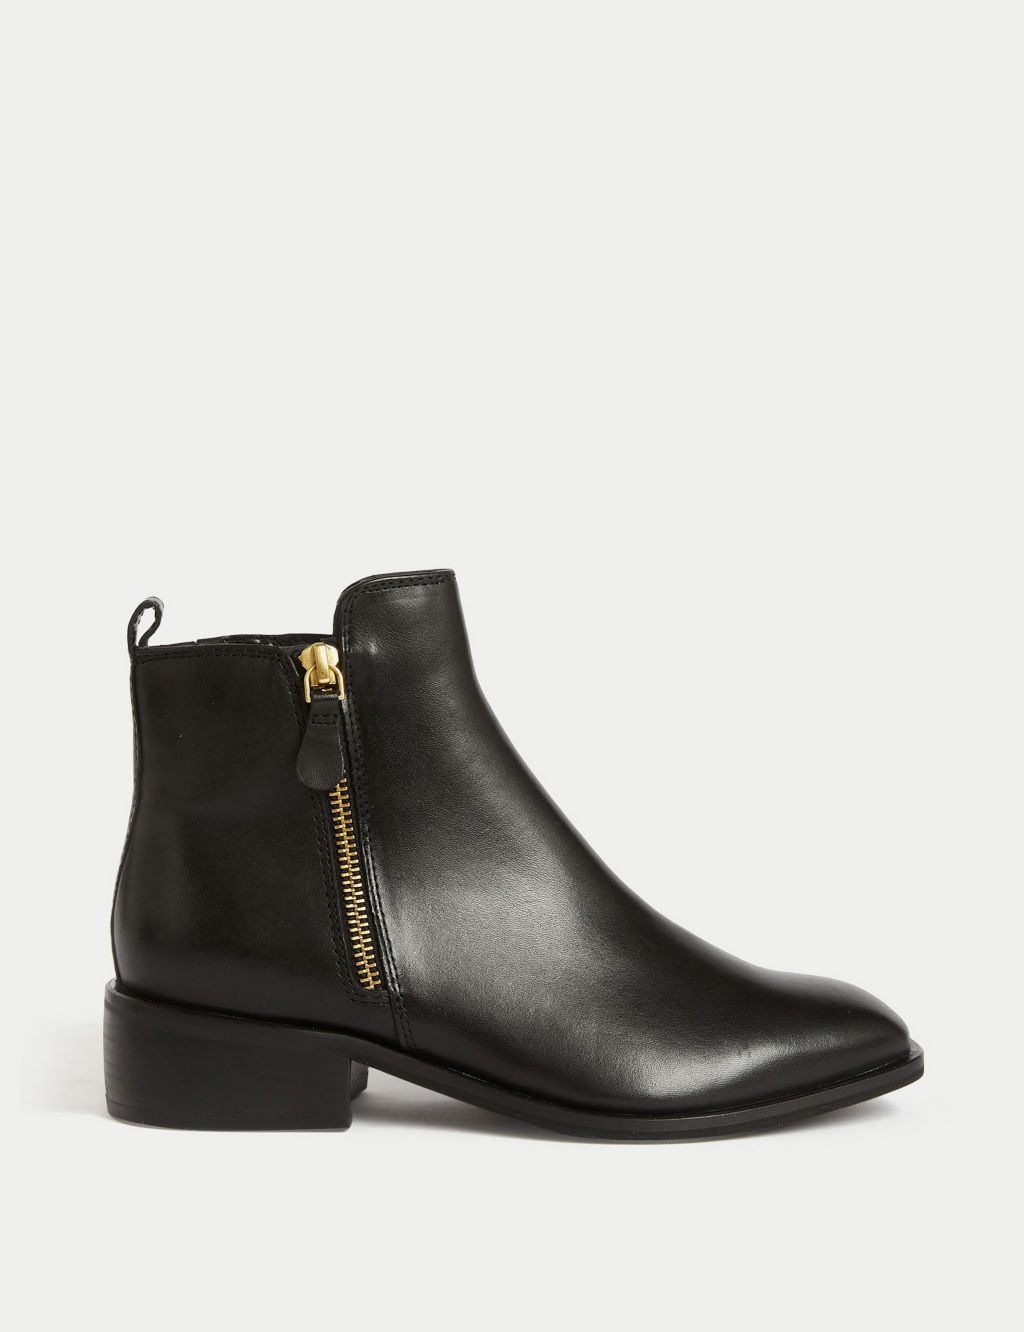 Leather Ankle Boots image 1